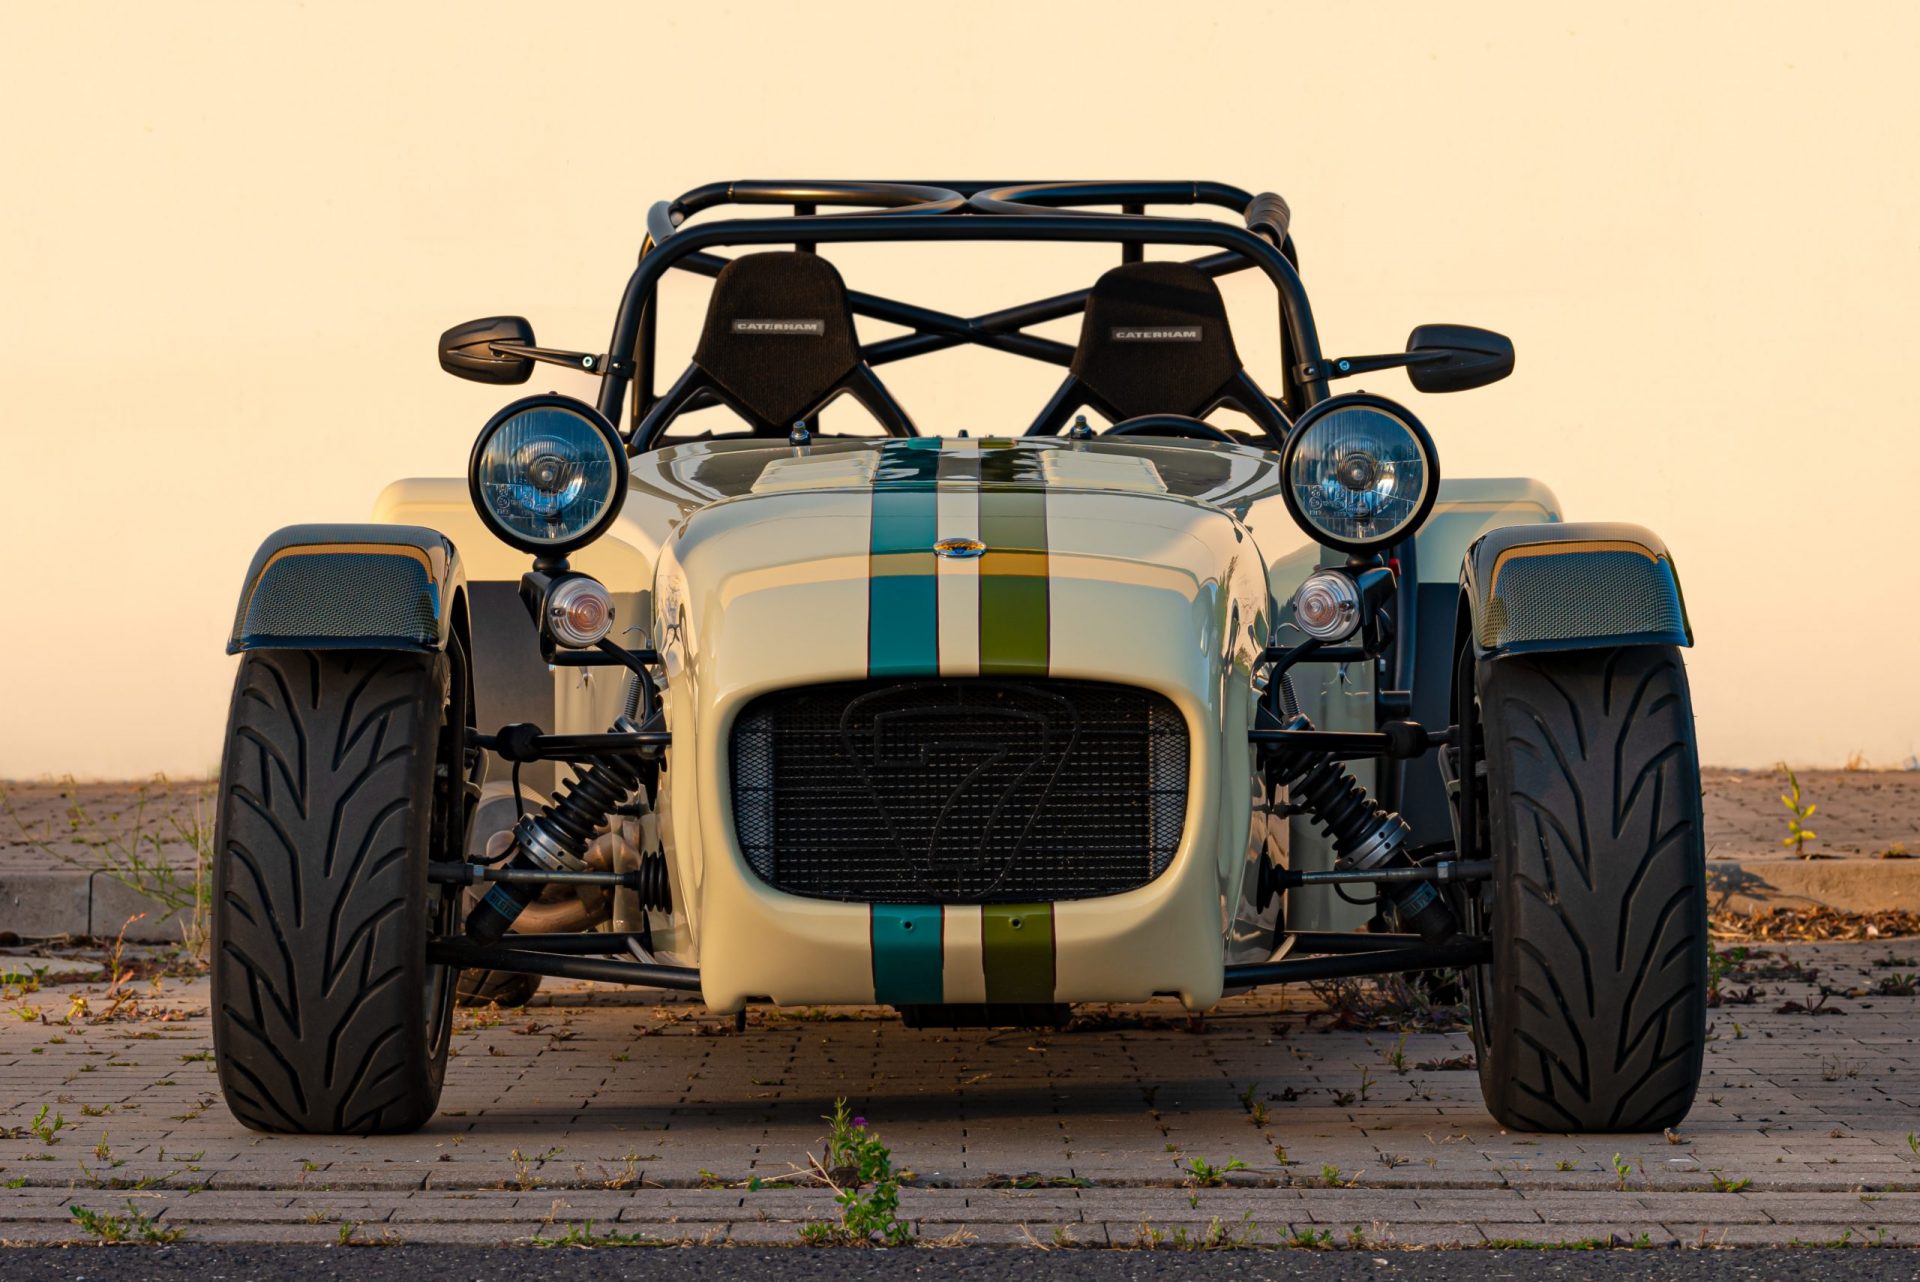 Caterham_Front_Clean-2-scaled.jpg